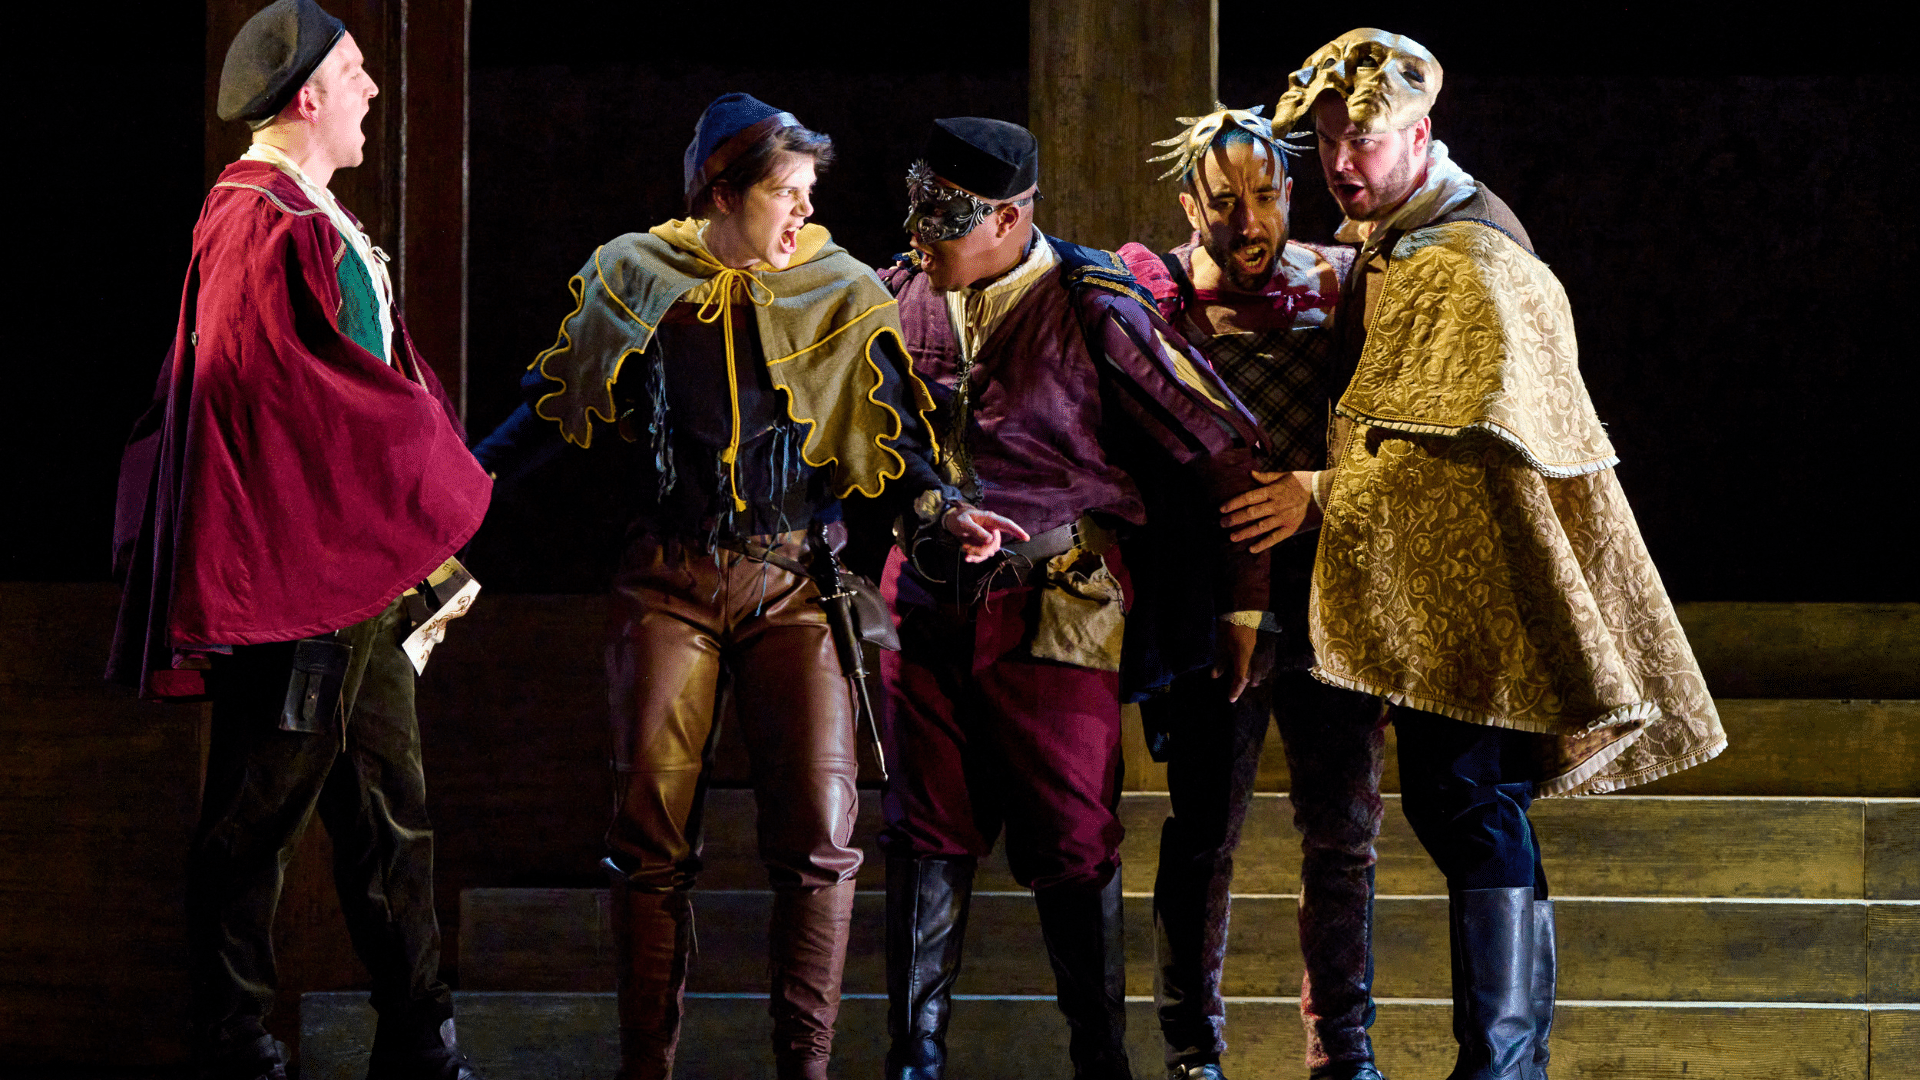 ETO: Lucrezia Borgia production shot - A group of five men wearing colourful outfits stood closely together in a line. They are all singing and they have serious expressions on their faces. The man in the middle wears an ornate mask across his eyes and the two men on the right have masks resting on their heads. Behind them are some wooden steps.